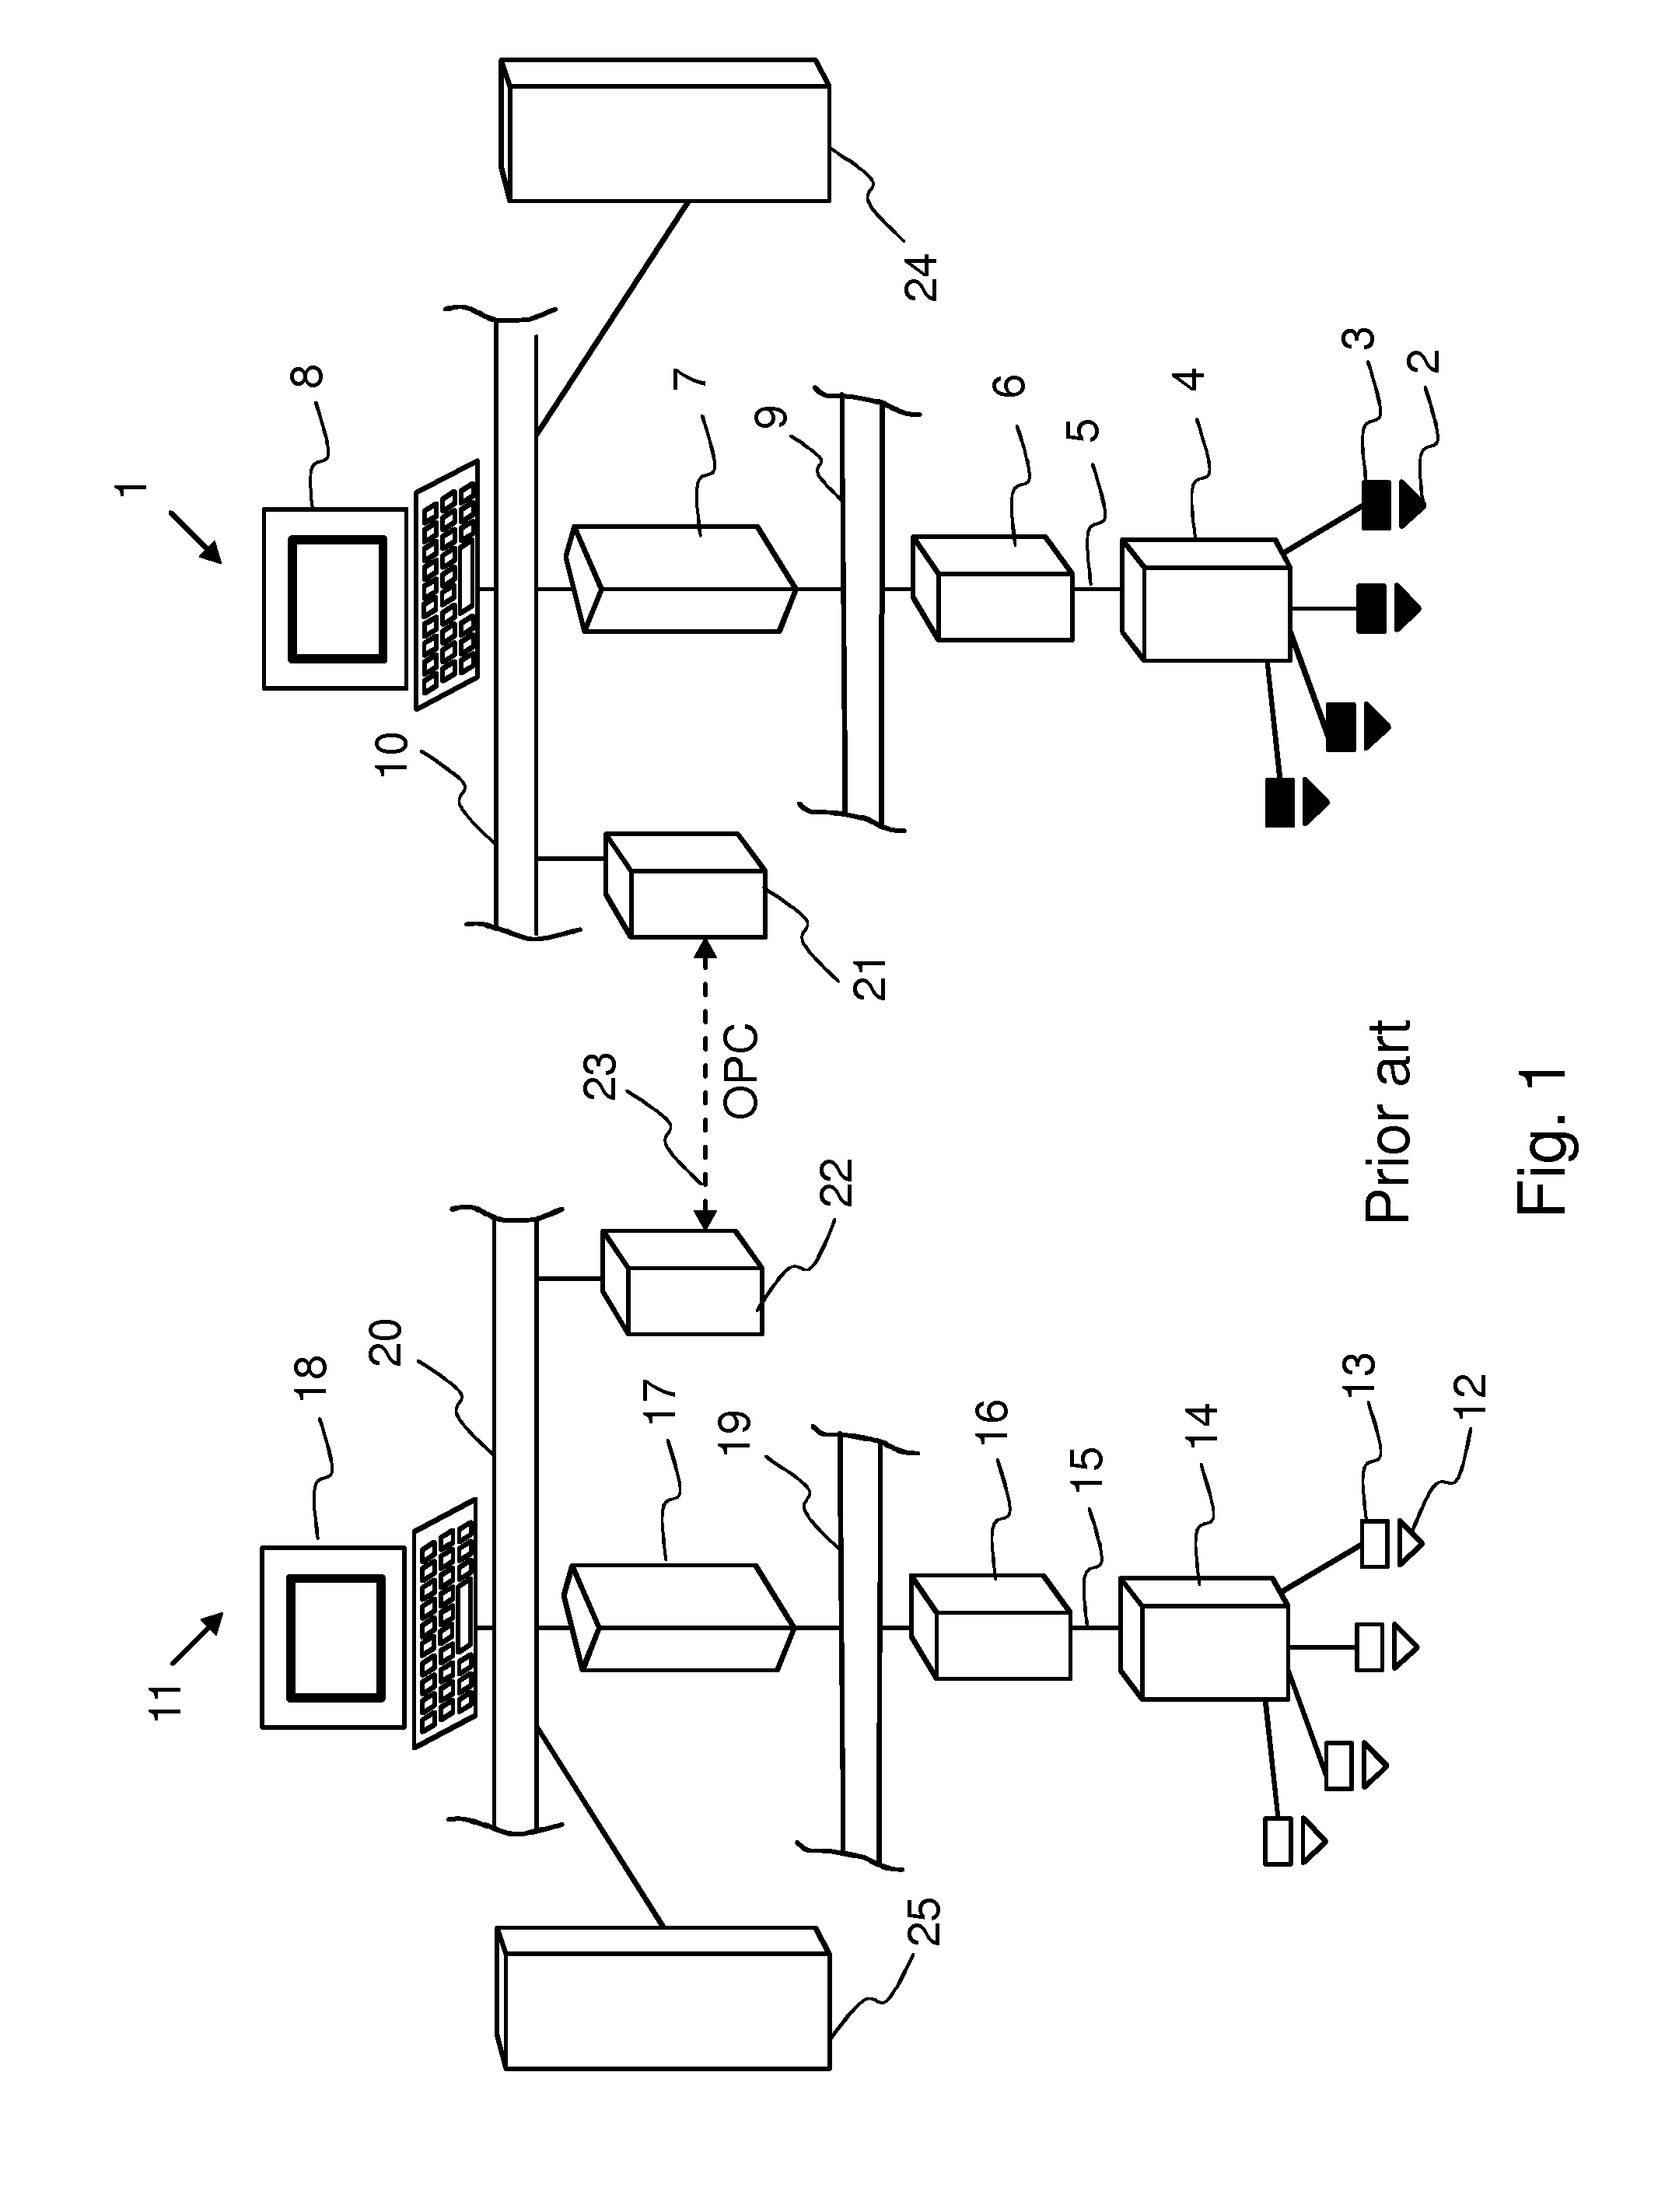 Method for controlling a process and for monitoring the condition of process equipment, and an automation system